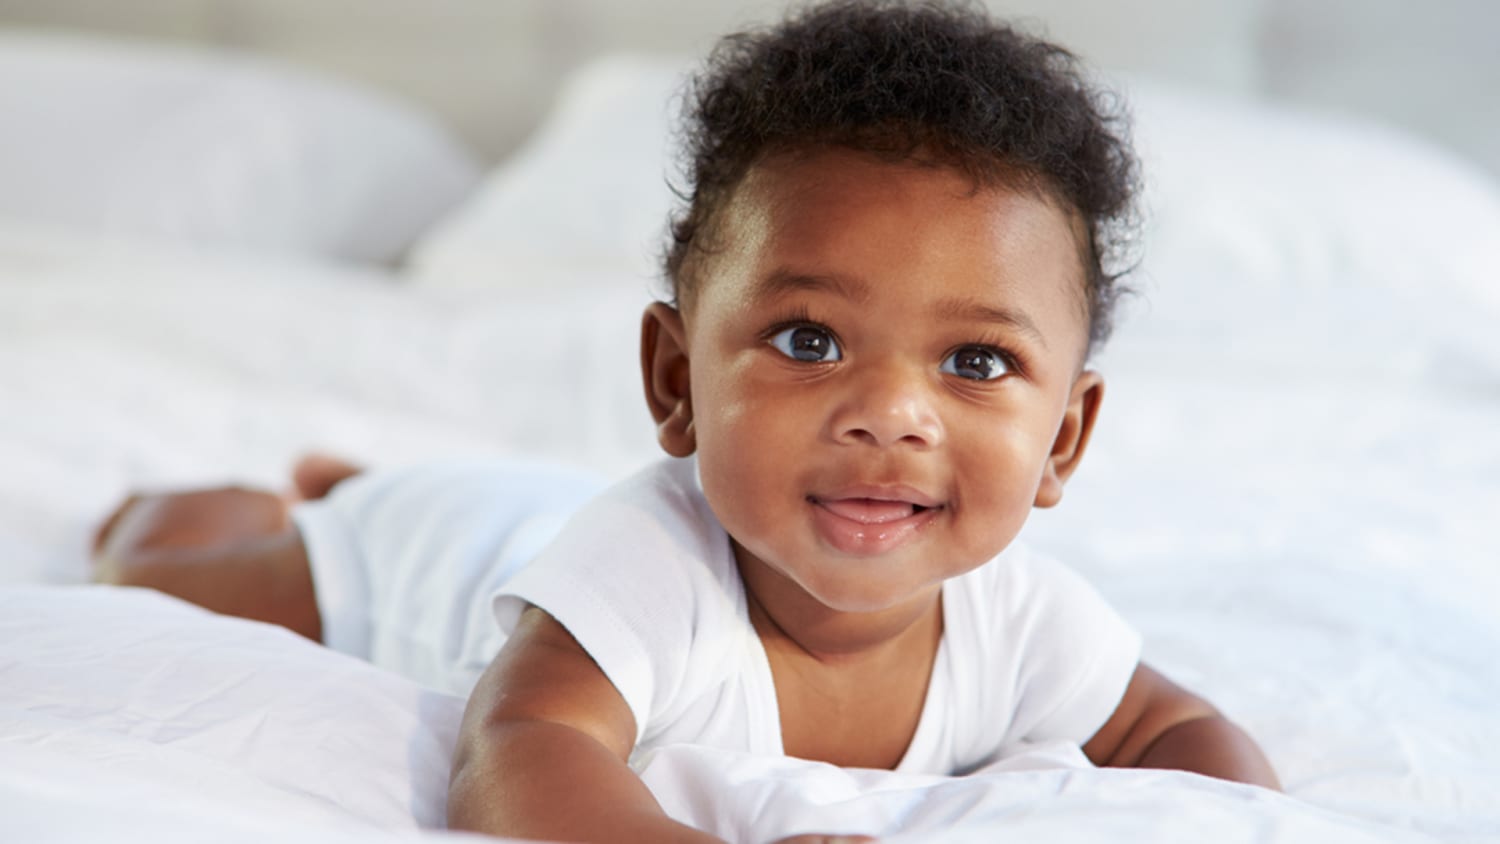 The hottest baby names of summer 2016 according to Nameberry - TODAY.com1920 x 1080